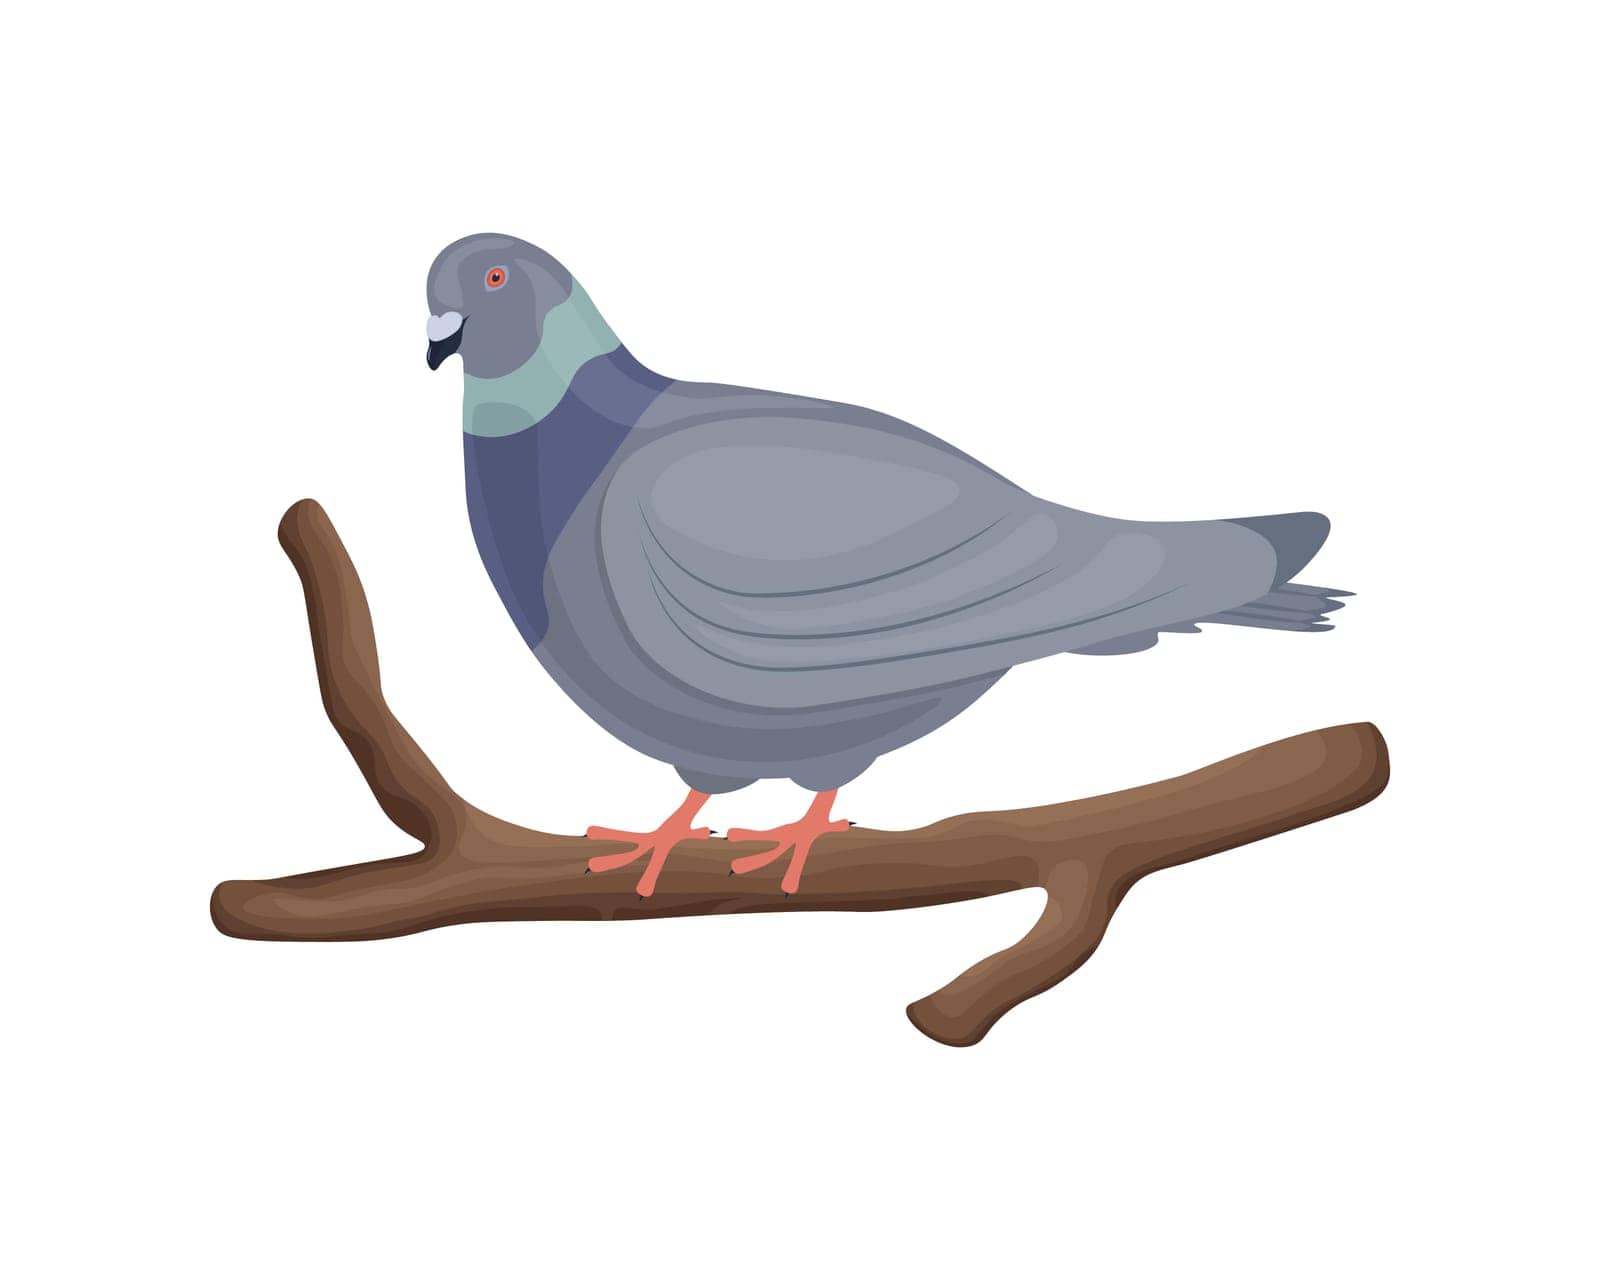 Pigeon. A cute cartoon-style pigeon is sitting on a tree branch. A pigeon on a branch. Vector illustration isolated on a white background.